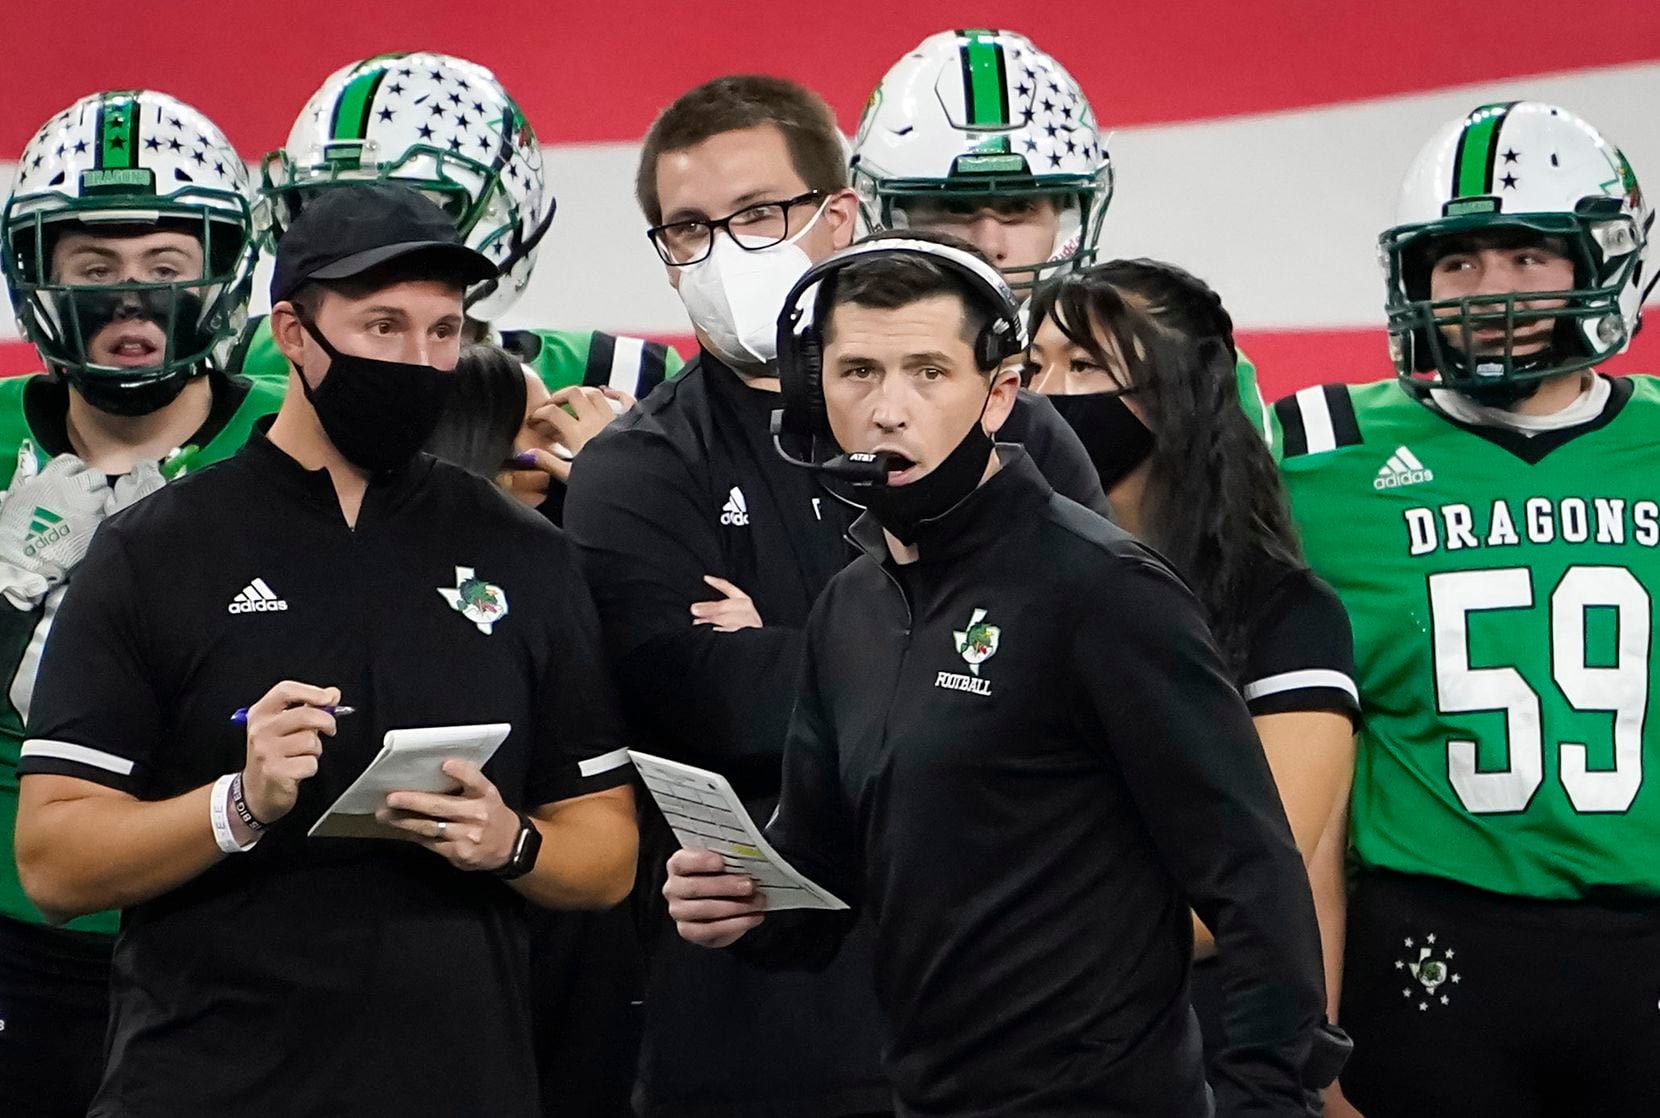 Southlake Carroll head coach Riley Dodge calls in a play during the first quarter of the Class 6A Division I state football championship game against Austin Westlake at AT&T Stadium on Saturday, Jan. 16, 2021, in Arlington, Texas.